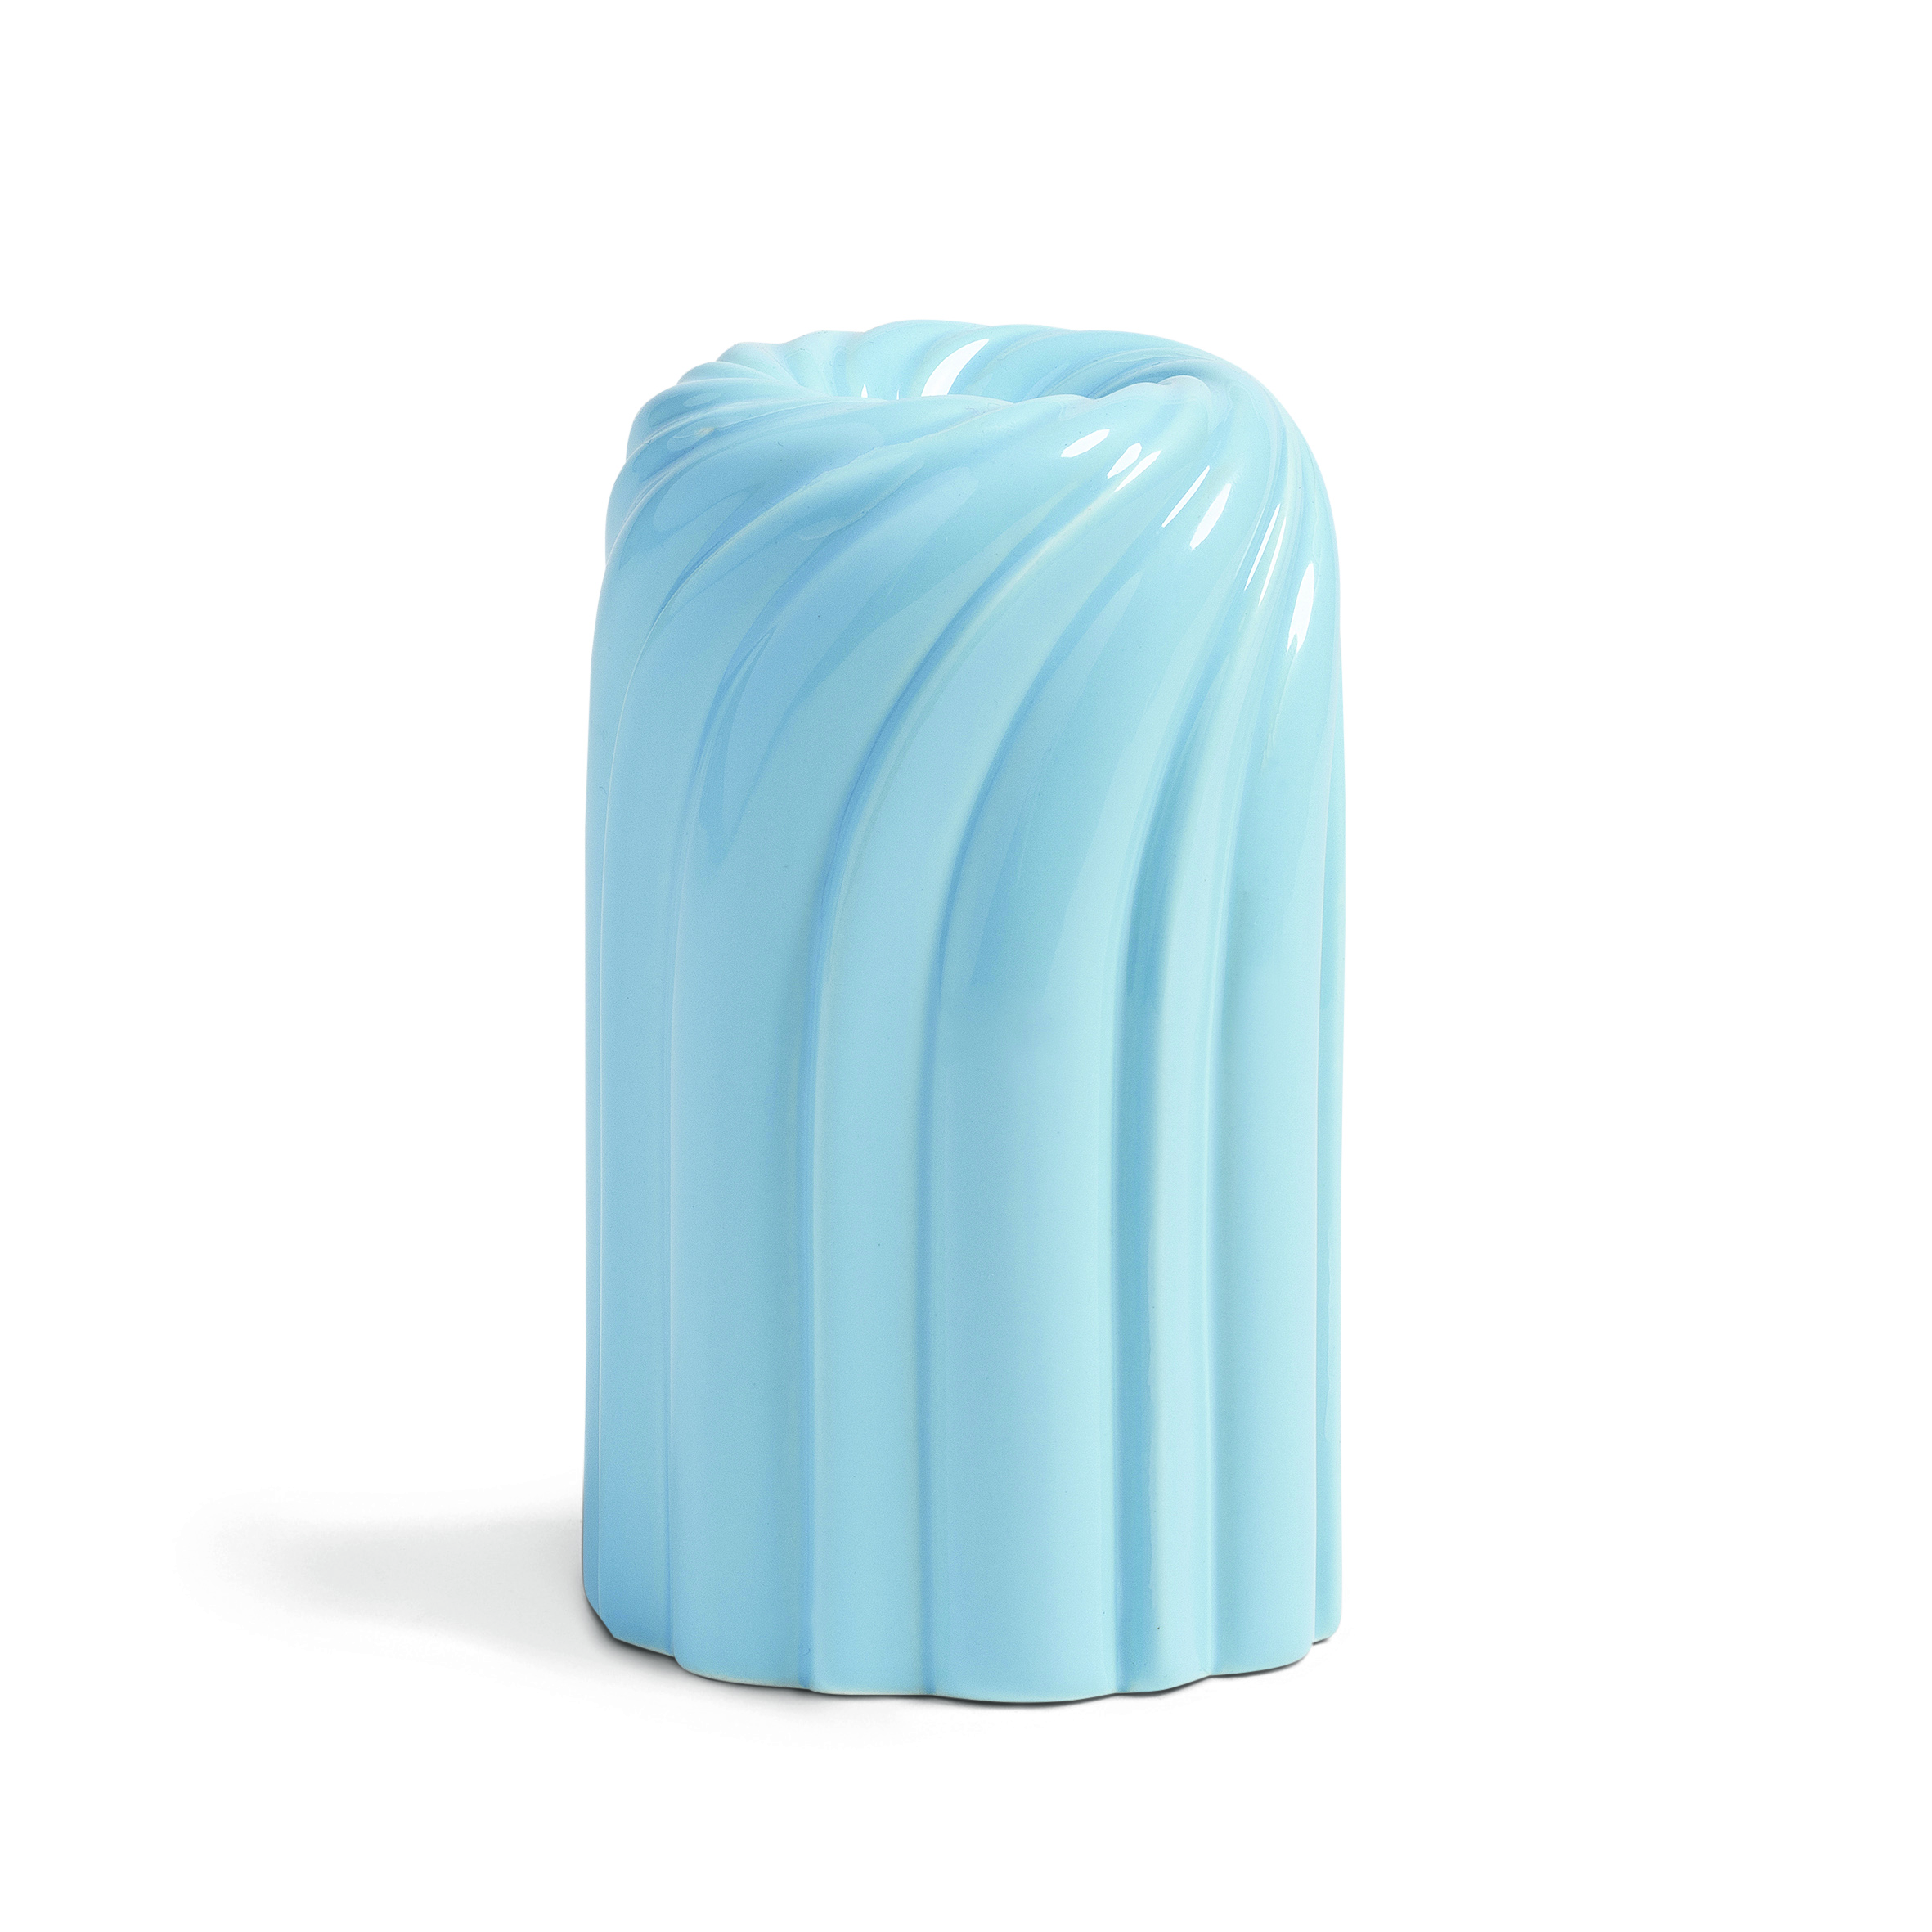 andklevering-candle-holder-turban-light-blue